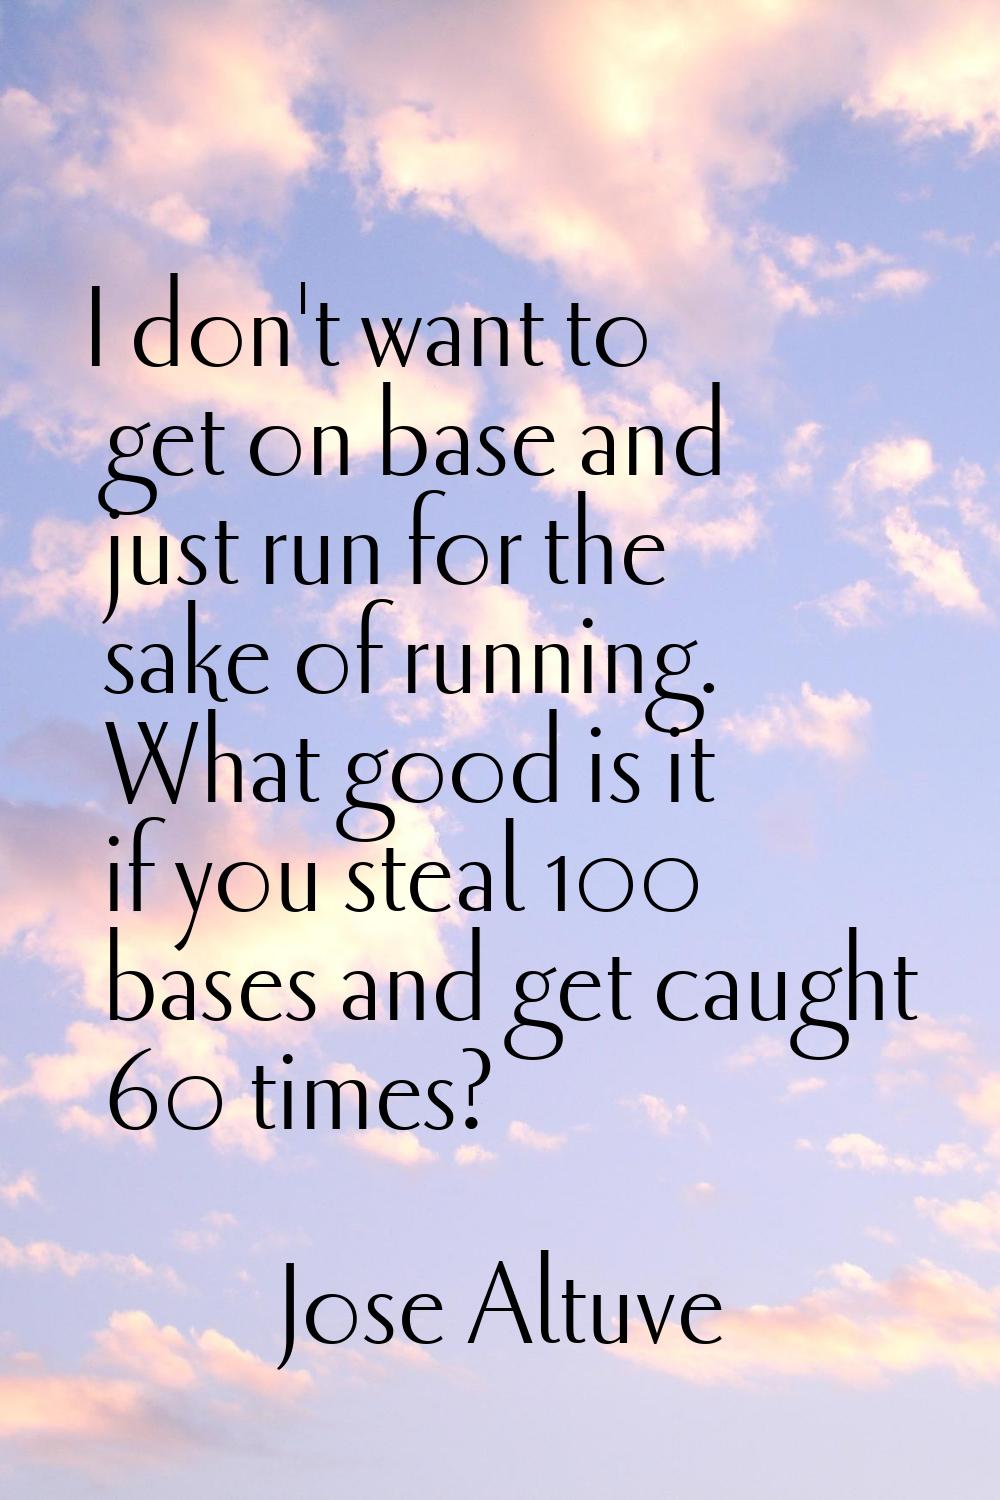 I don't want to get on base and just run for the sake of running. What good is it if you steal 100 